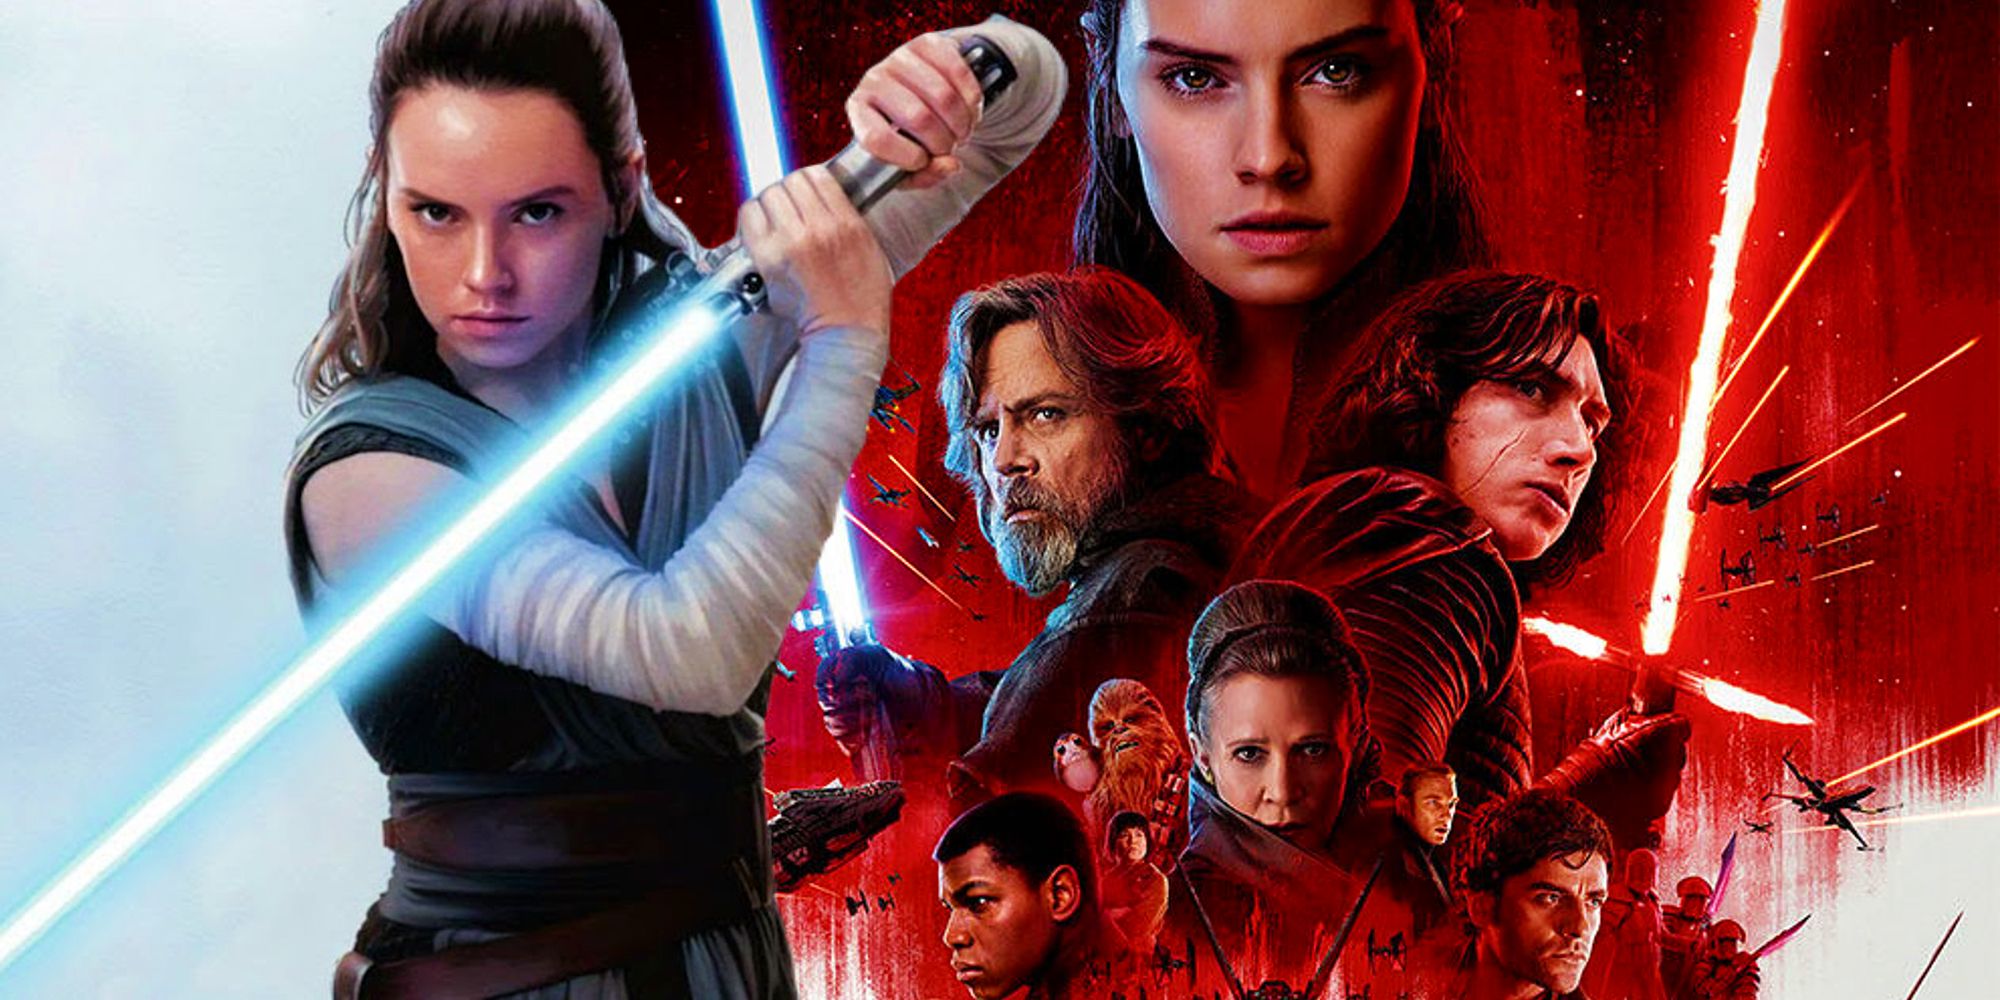 Rey Skywalker wielding her lightsaber next to the poster for Star Wars: The Last Jedi